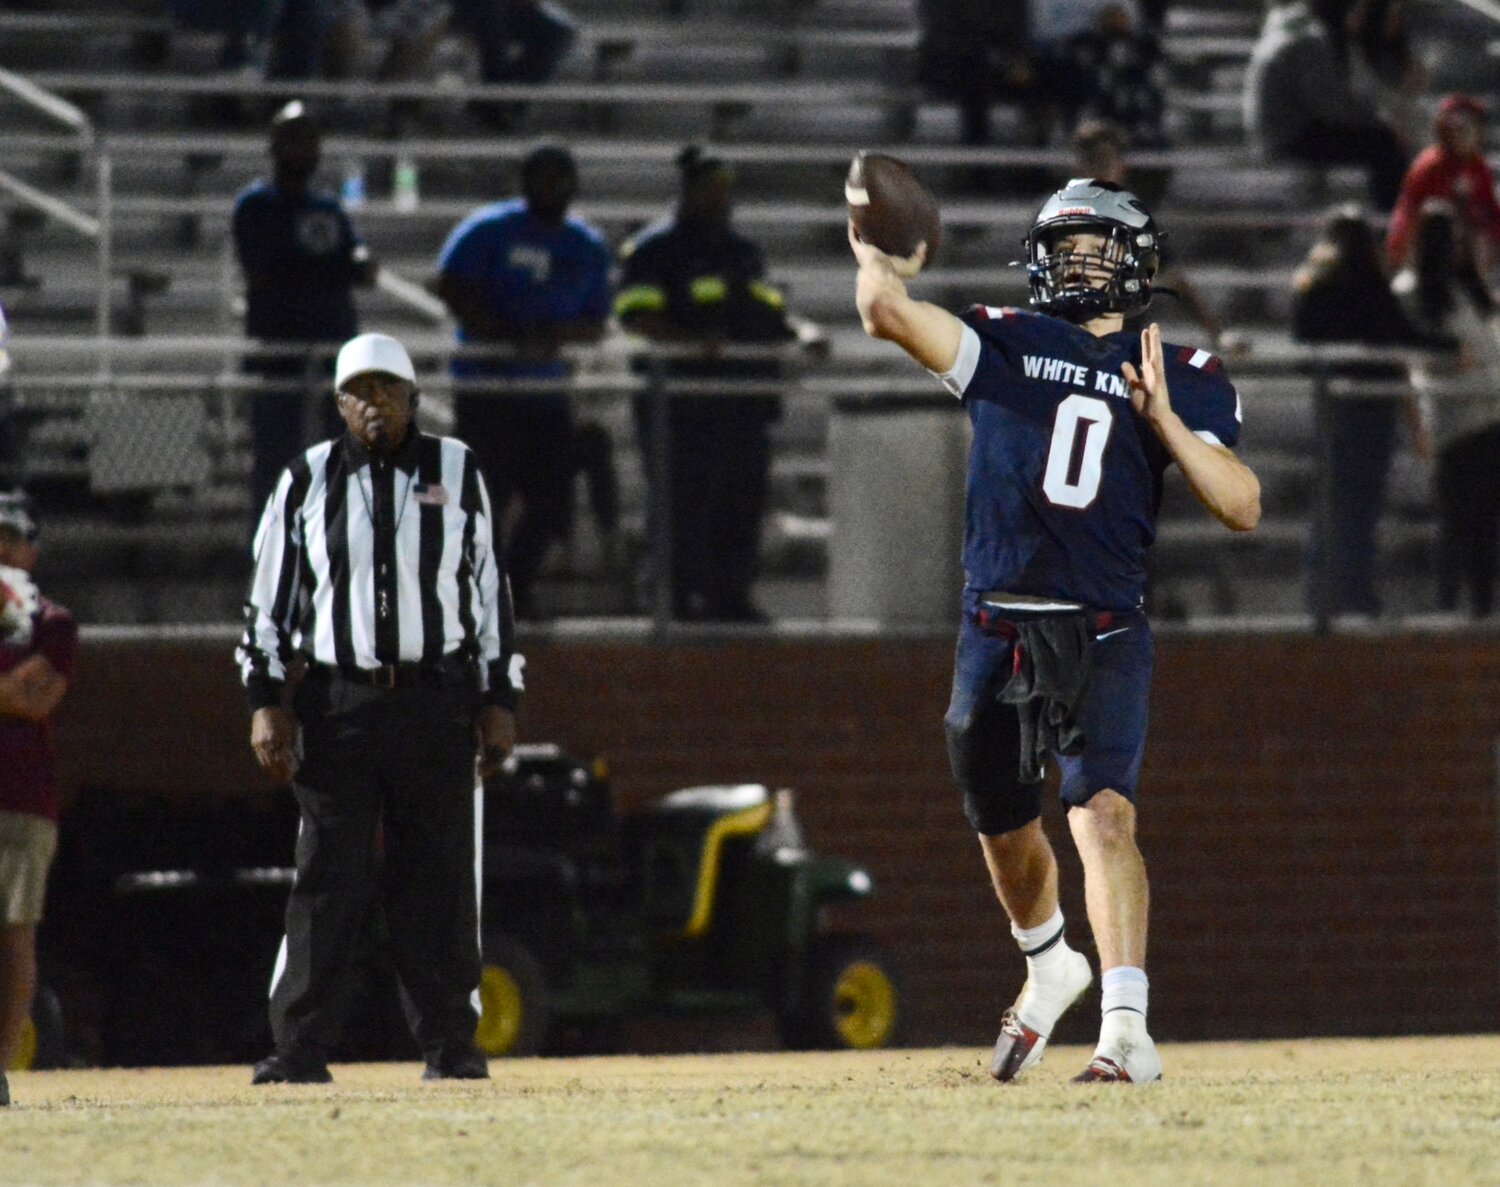 White Knoll defeated Sumter 35-7 Nov. 17 to move on to the 5A Lower State final.